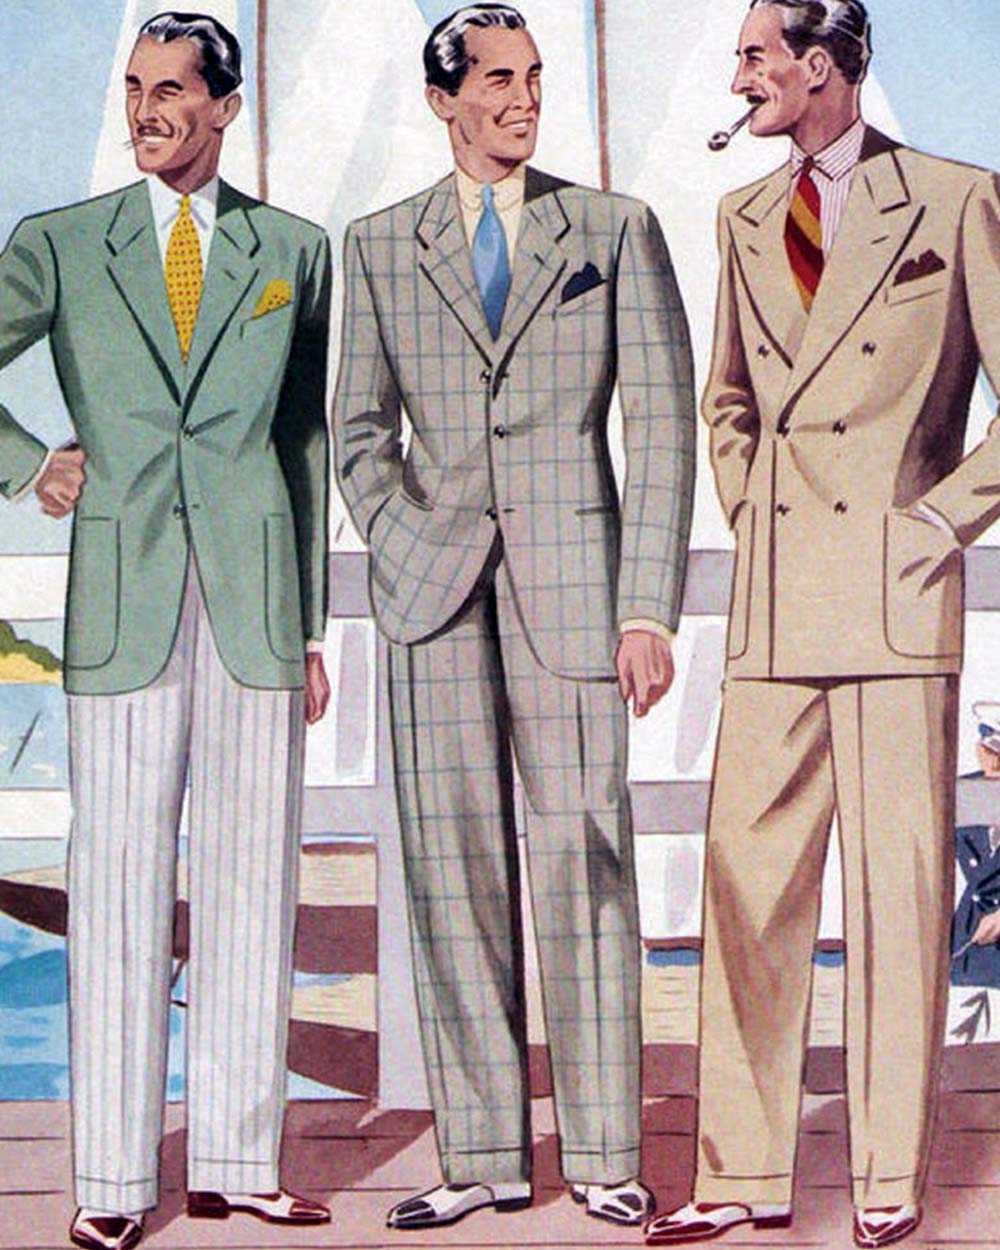 men in 1930s wearing high-waisted pants